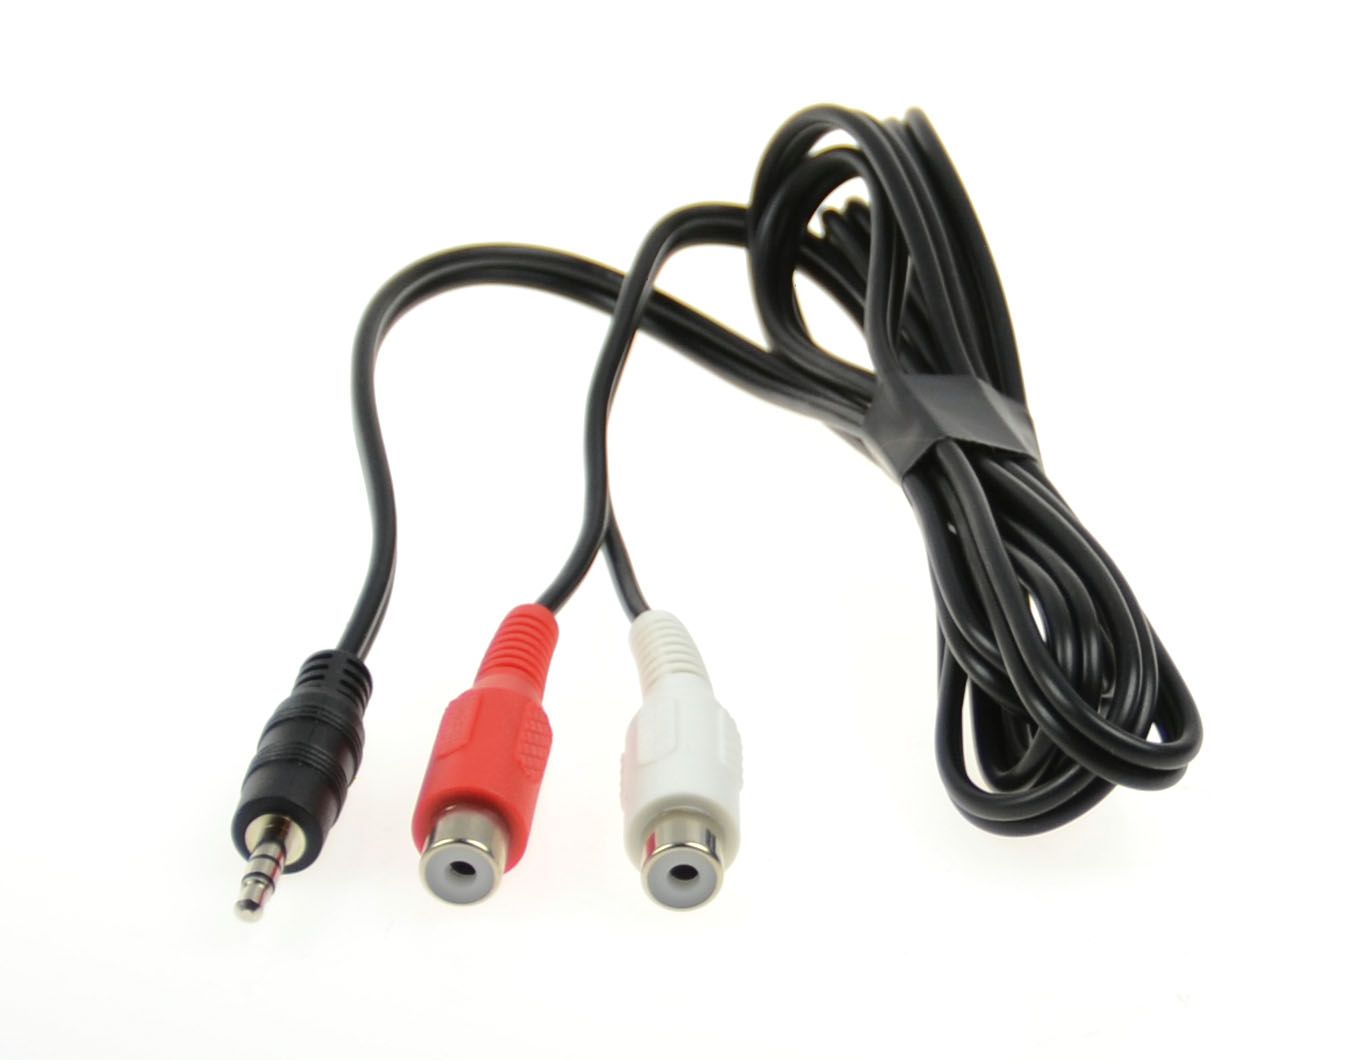 Aux adapter 2xRCA female > Male 3.5mm stereo Jack 1,5 meter